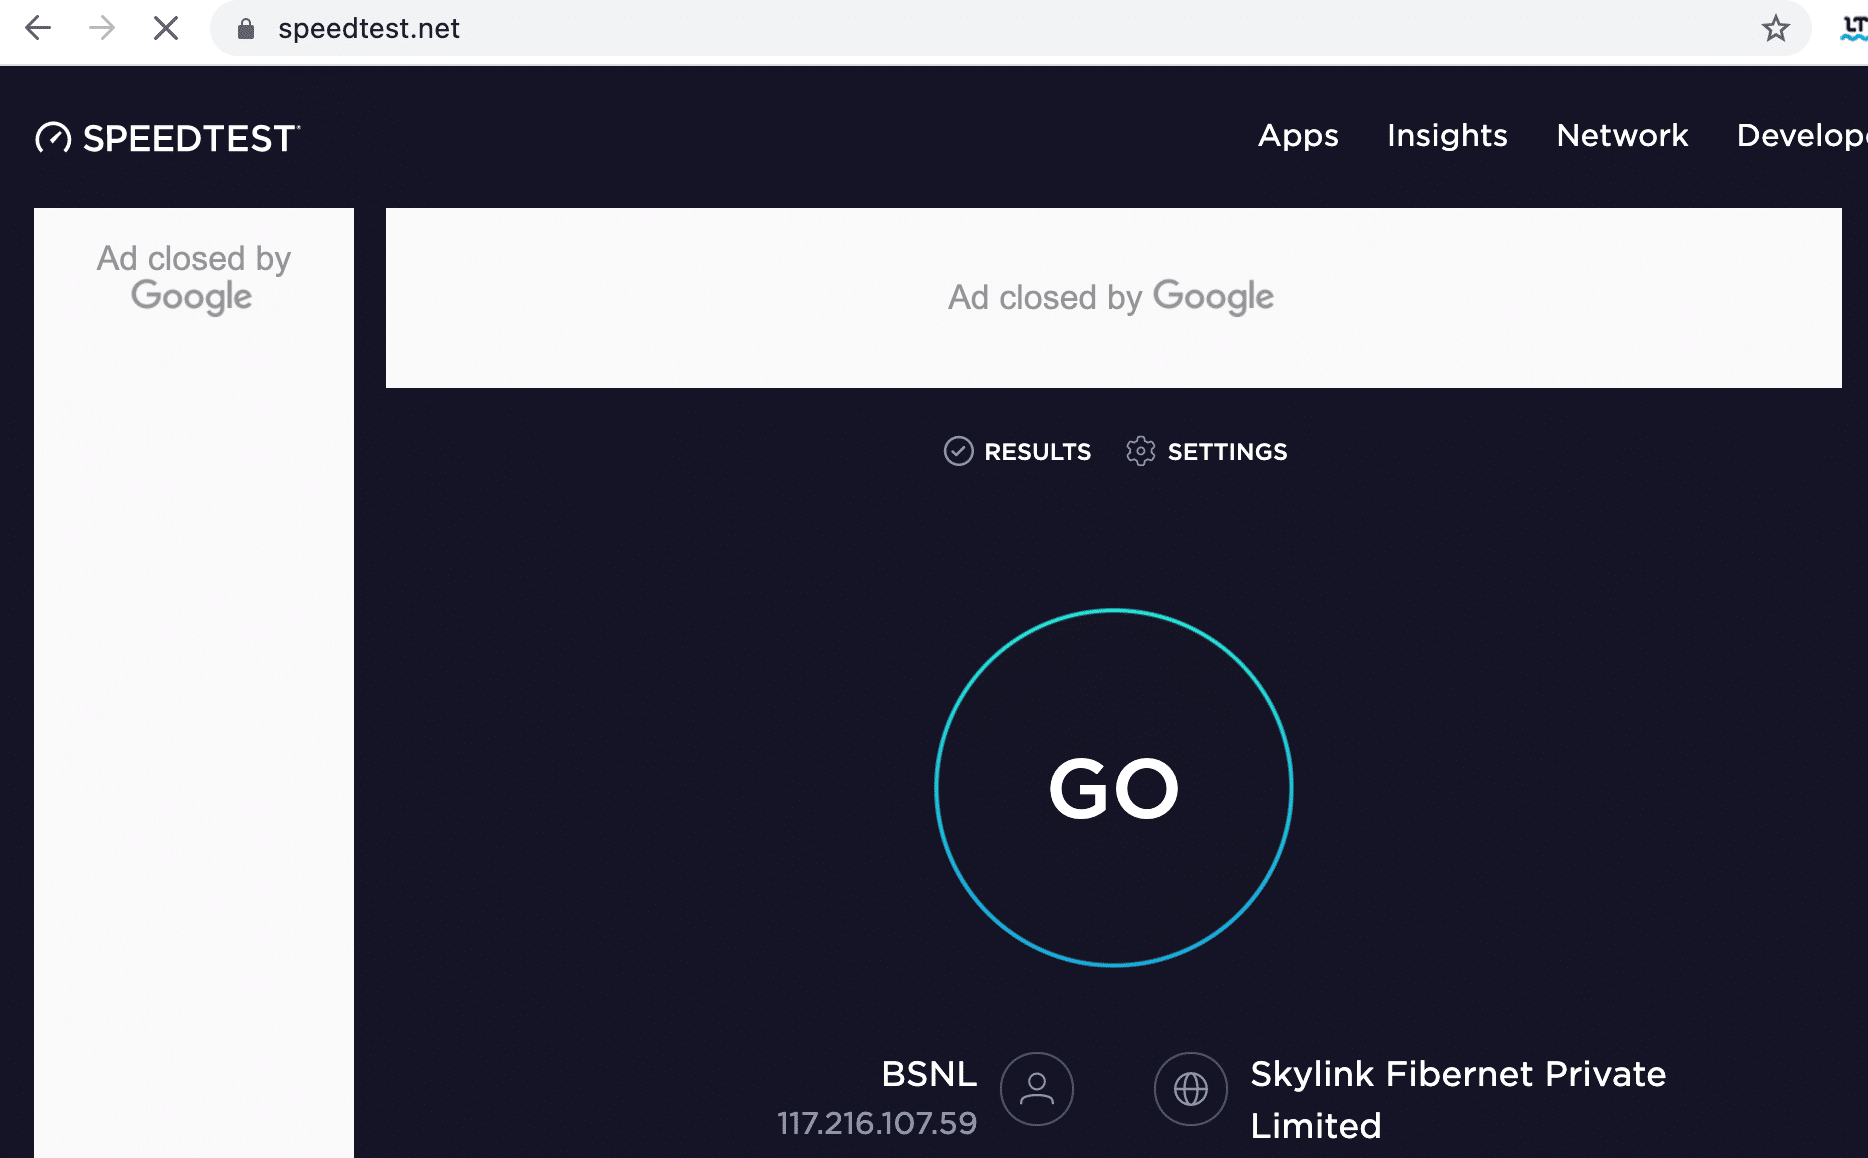 You can do a quick internet speed test on speedtest.net